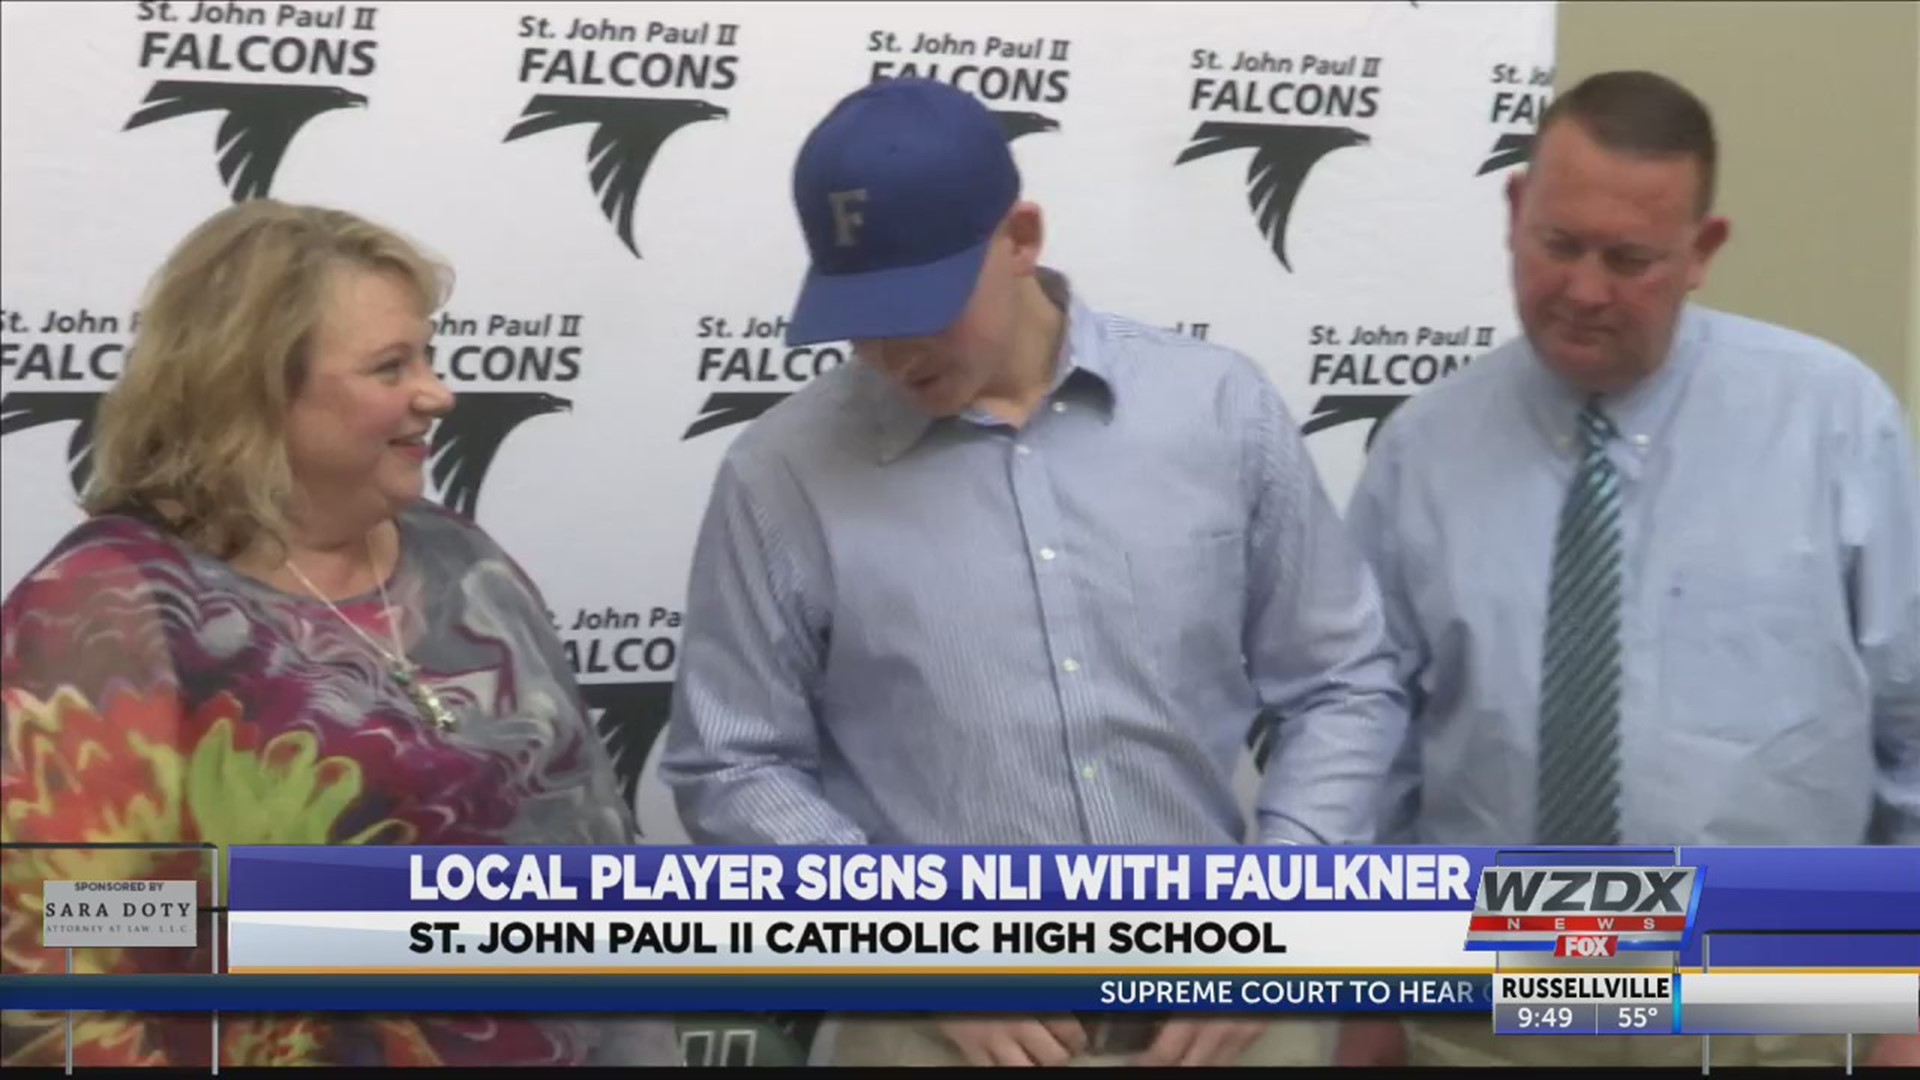 Jim Robison III signed to play baseball at Faulkner University in Montgomery Friday afternoon. Robison is a 4-year letterman who has played both 1st and 3rd base. He signed for both athletics and academics.